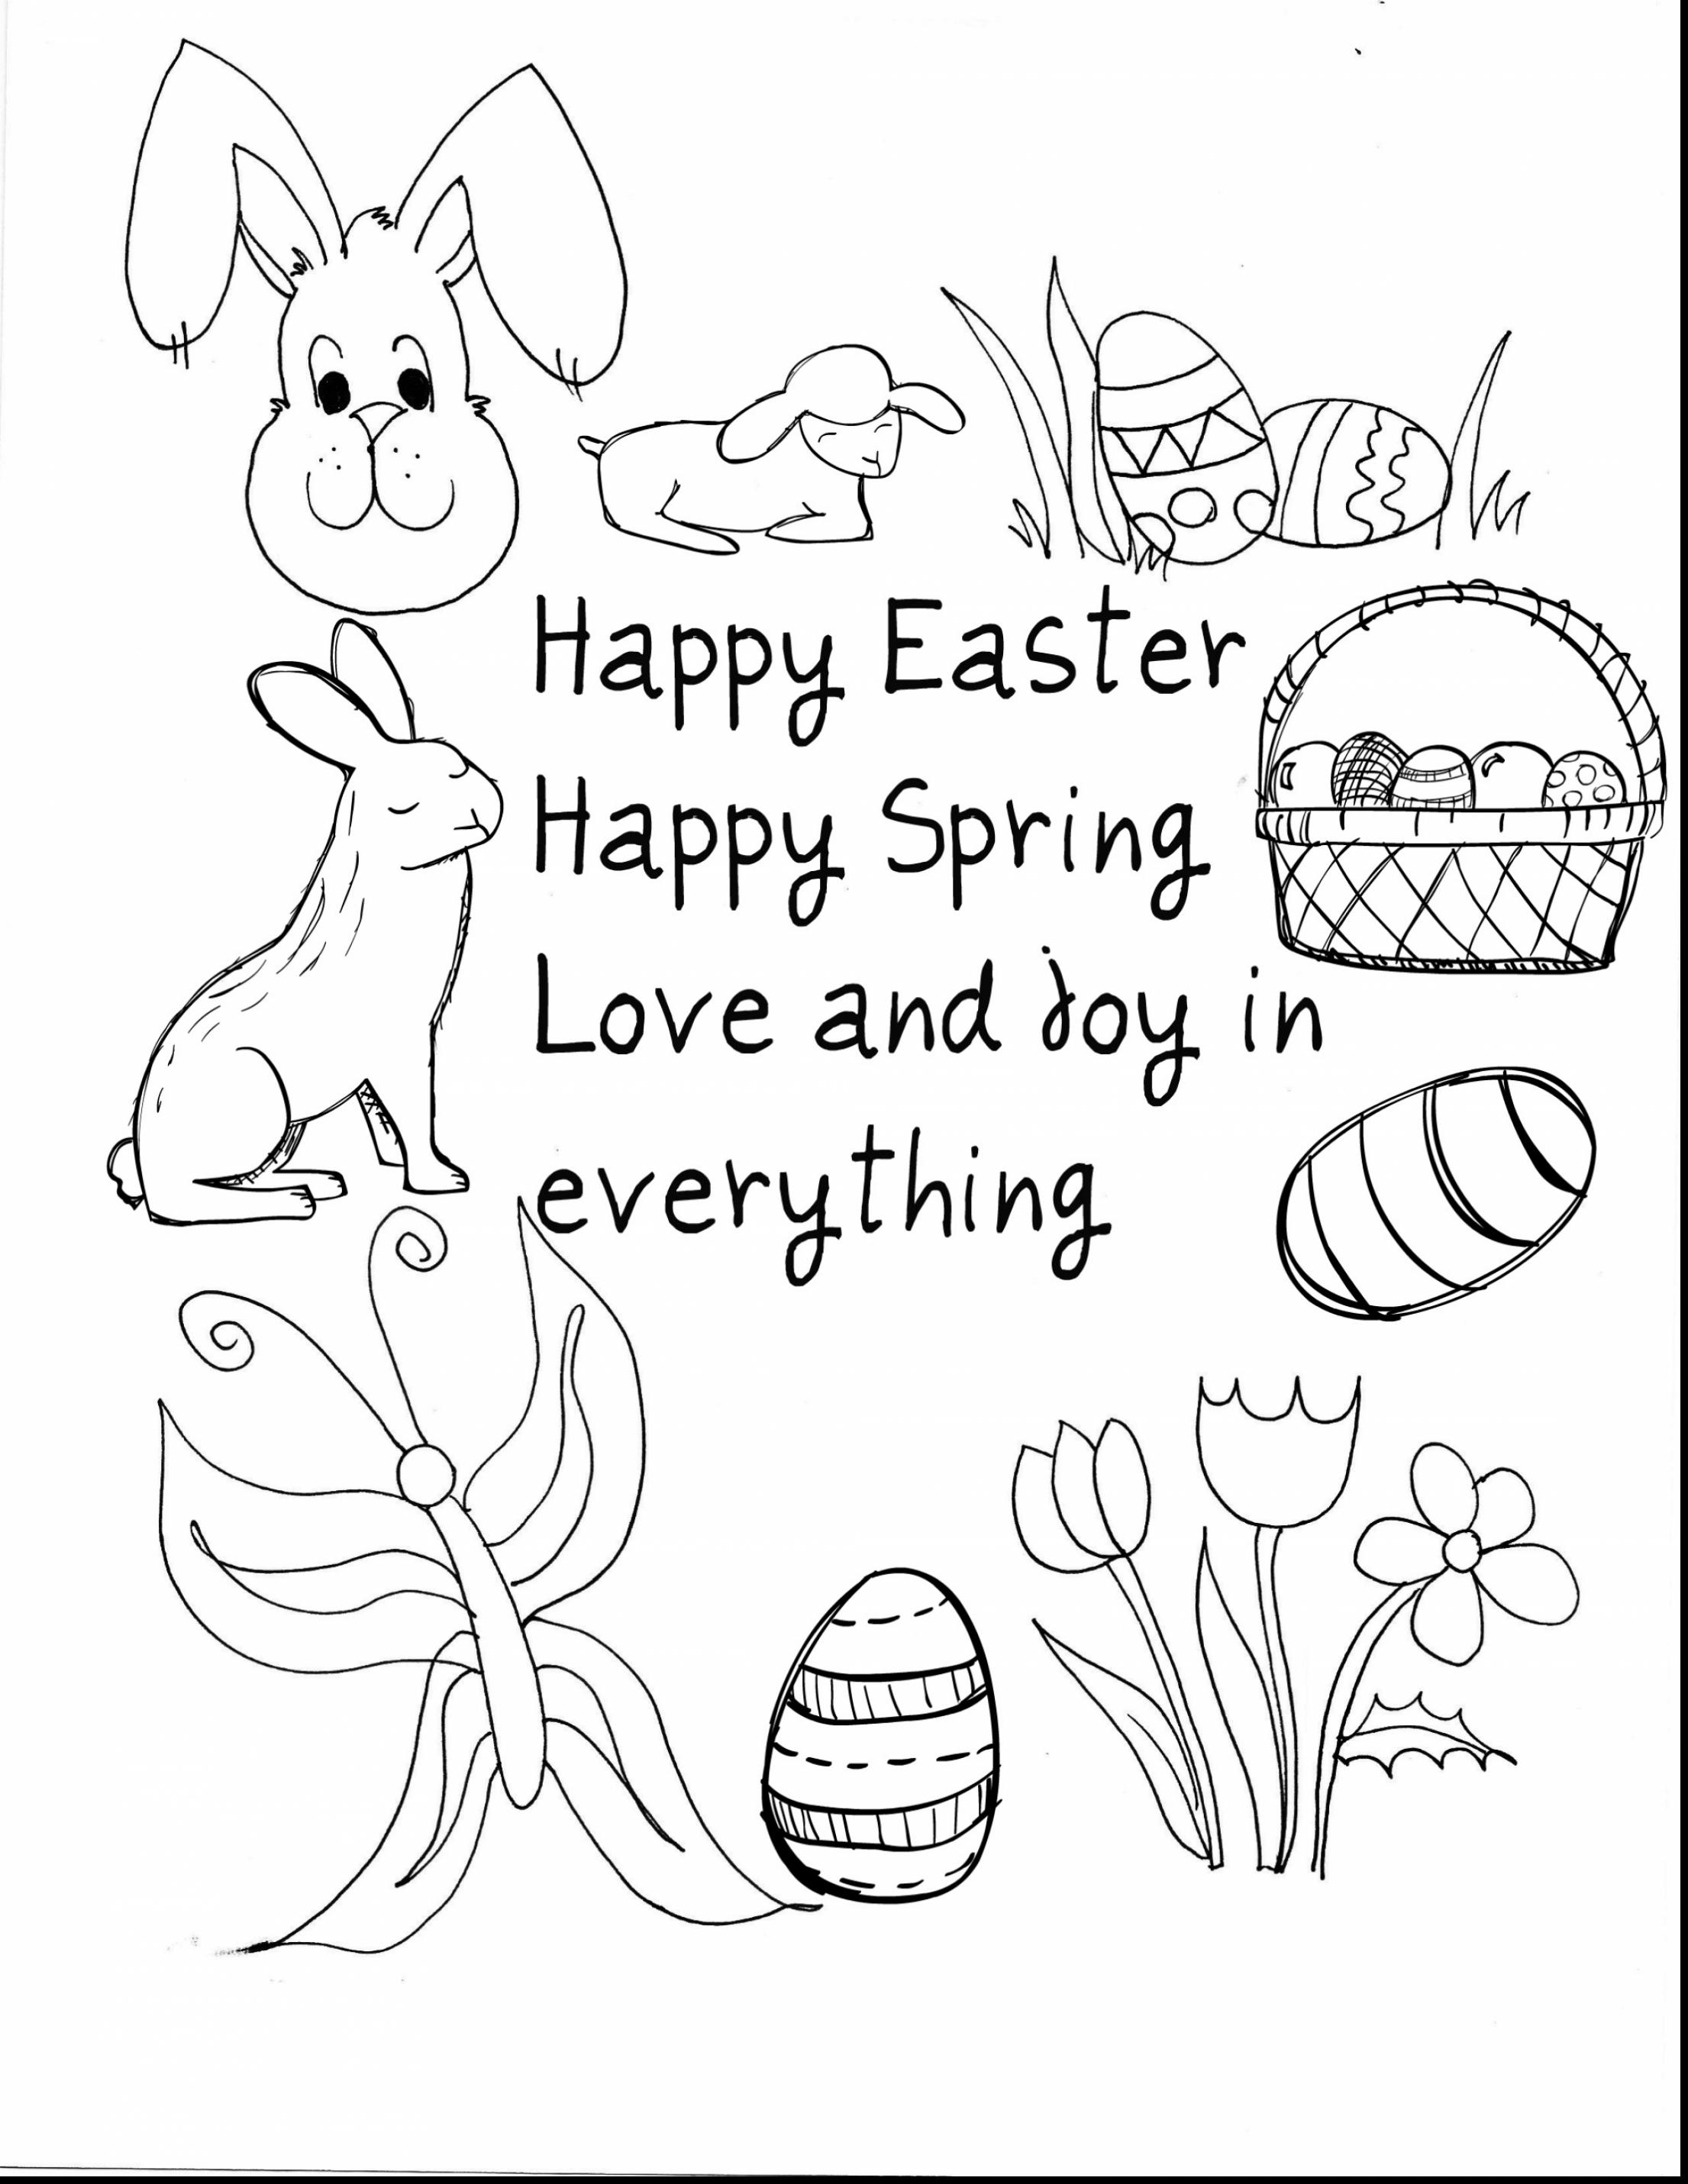 Religious Easter Coloring Pages For Preschoolers at GetColorings.com